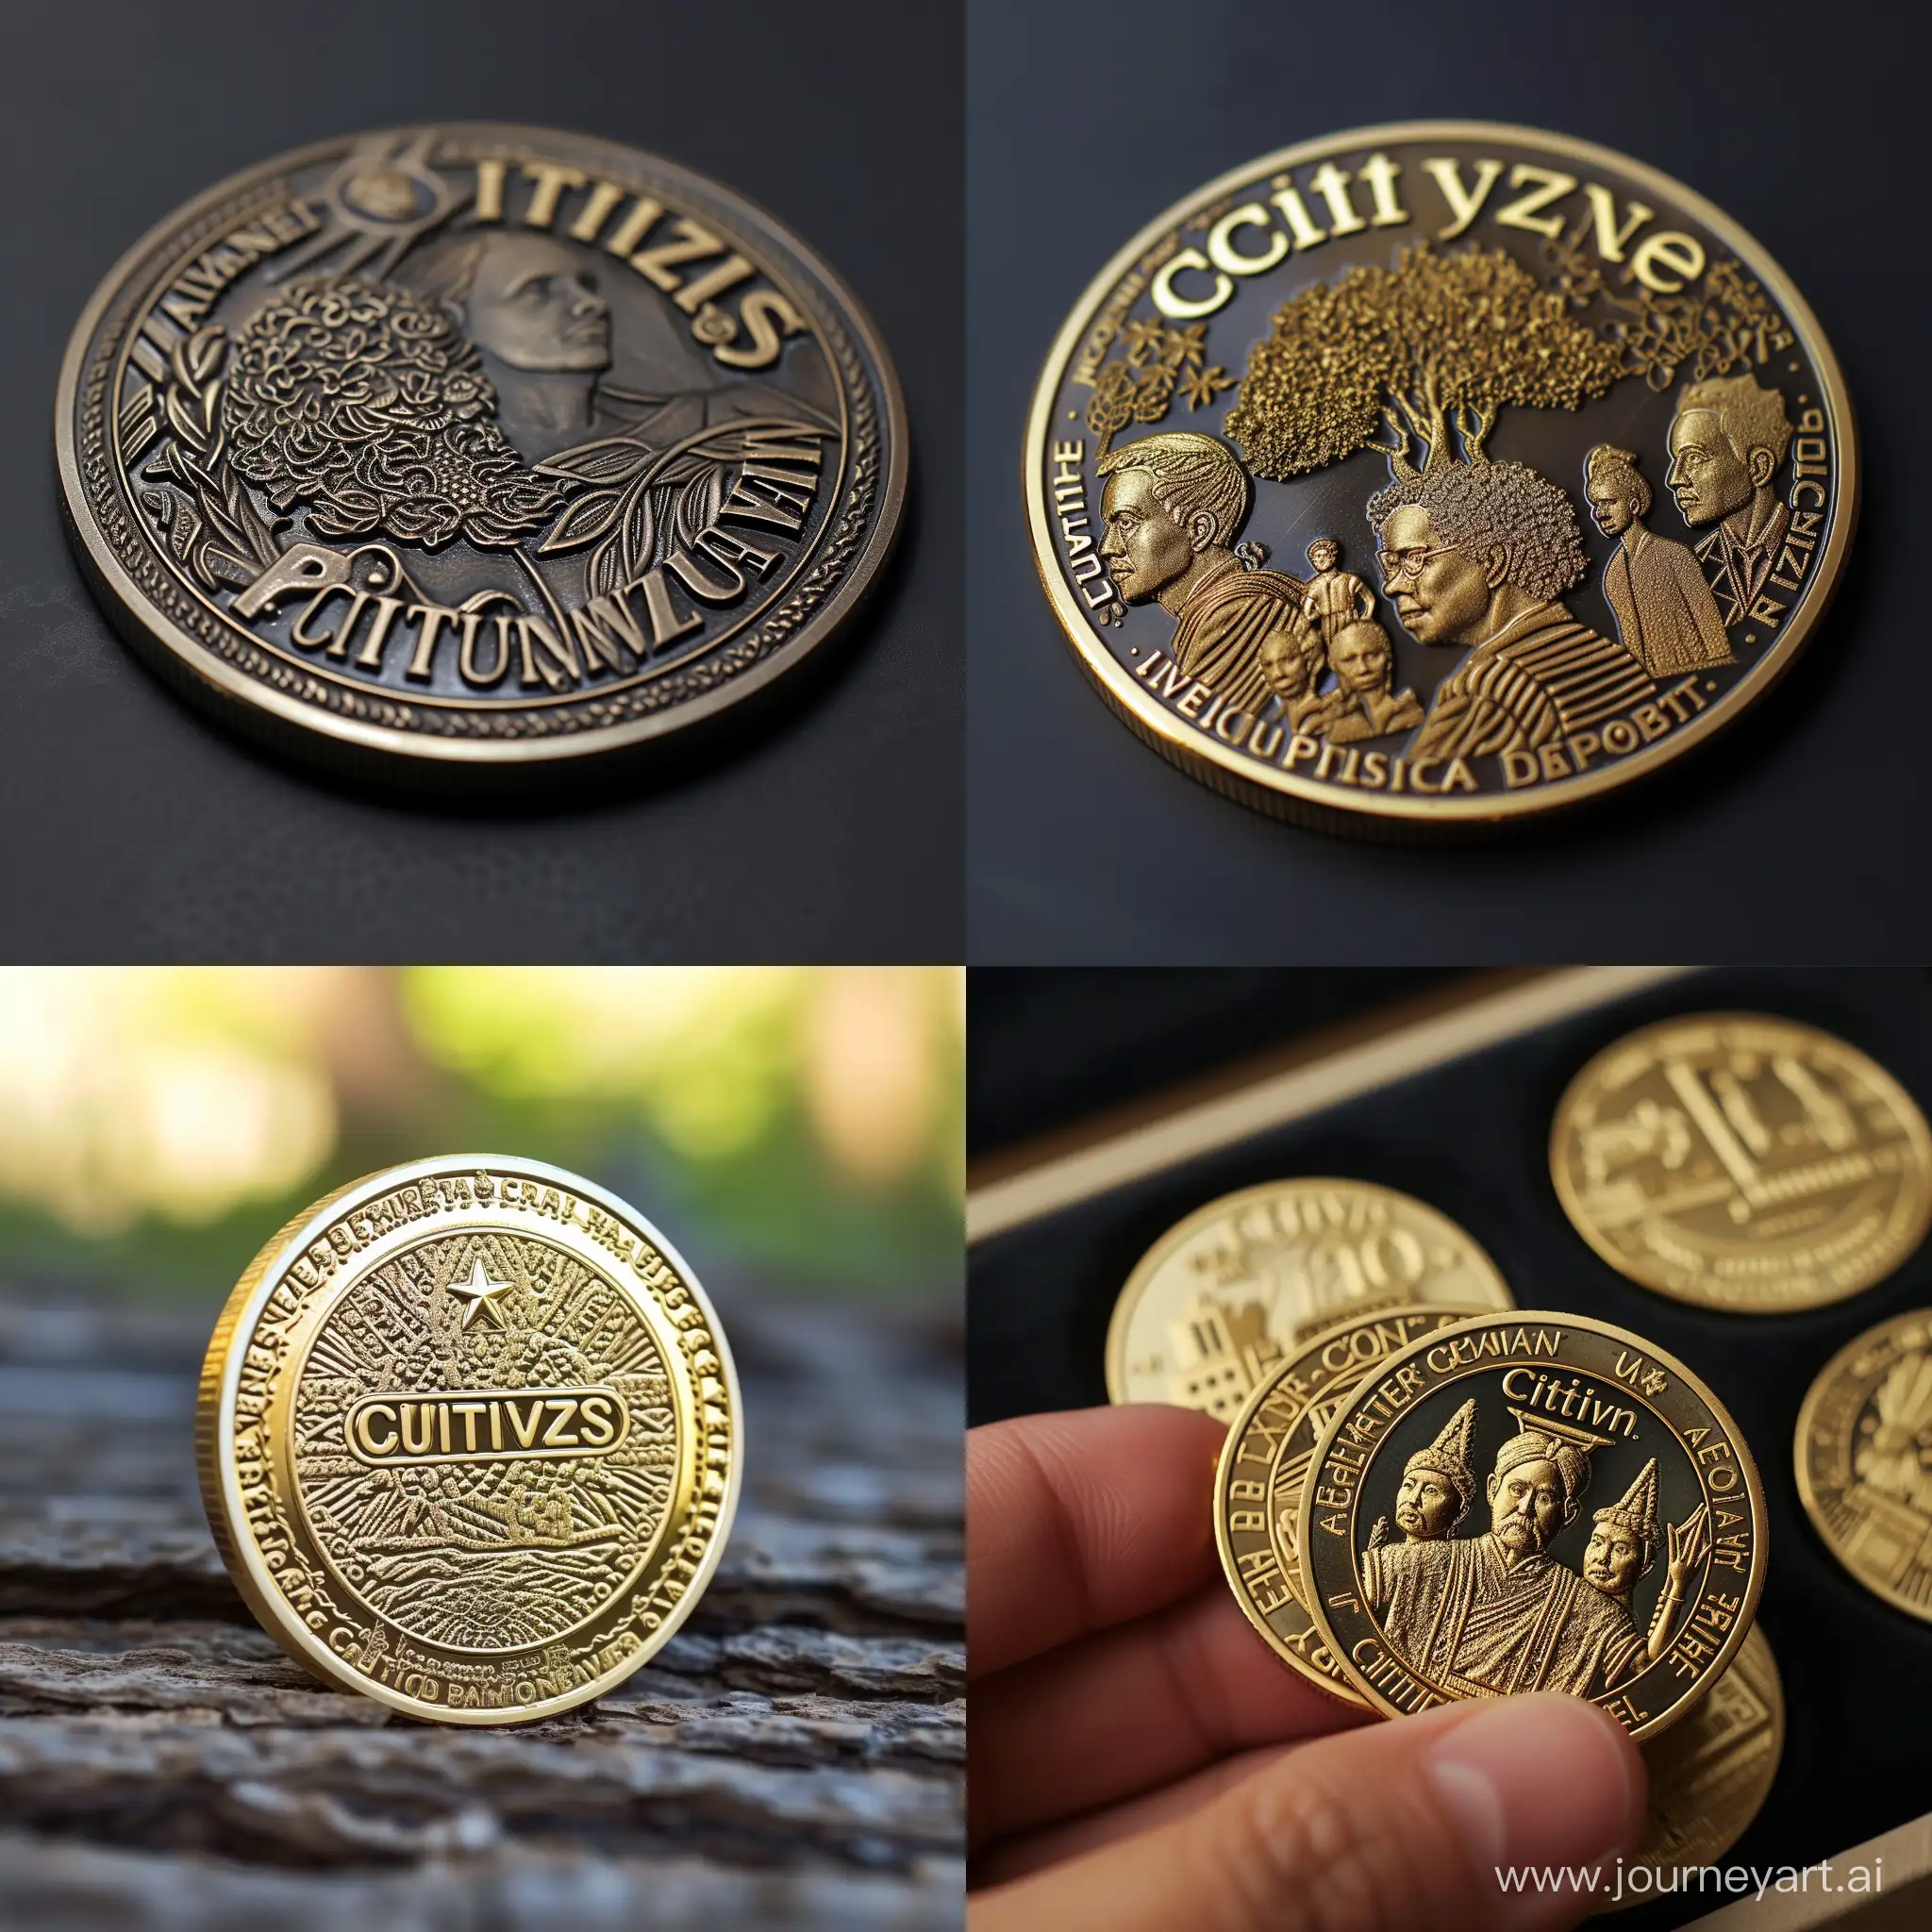 Certainly! The "Citizen" digital coin is designed to emulate the physical coin while incorporating blockchain features. It symbolizes unity through a blend of diverse ethnicities, promoting inclusivity and harmony in a decentralized world. The blockchain technology ensures transparent and secure transactions, fostering a global community of citizens connected by a common digital currency.